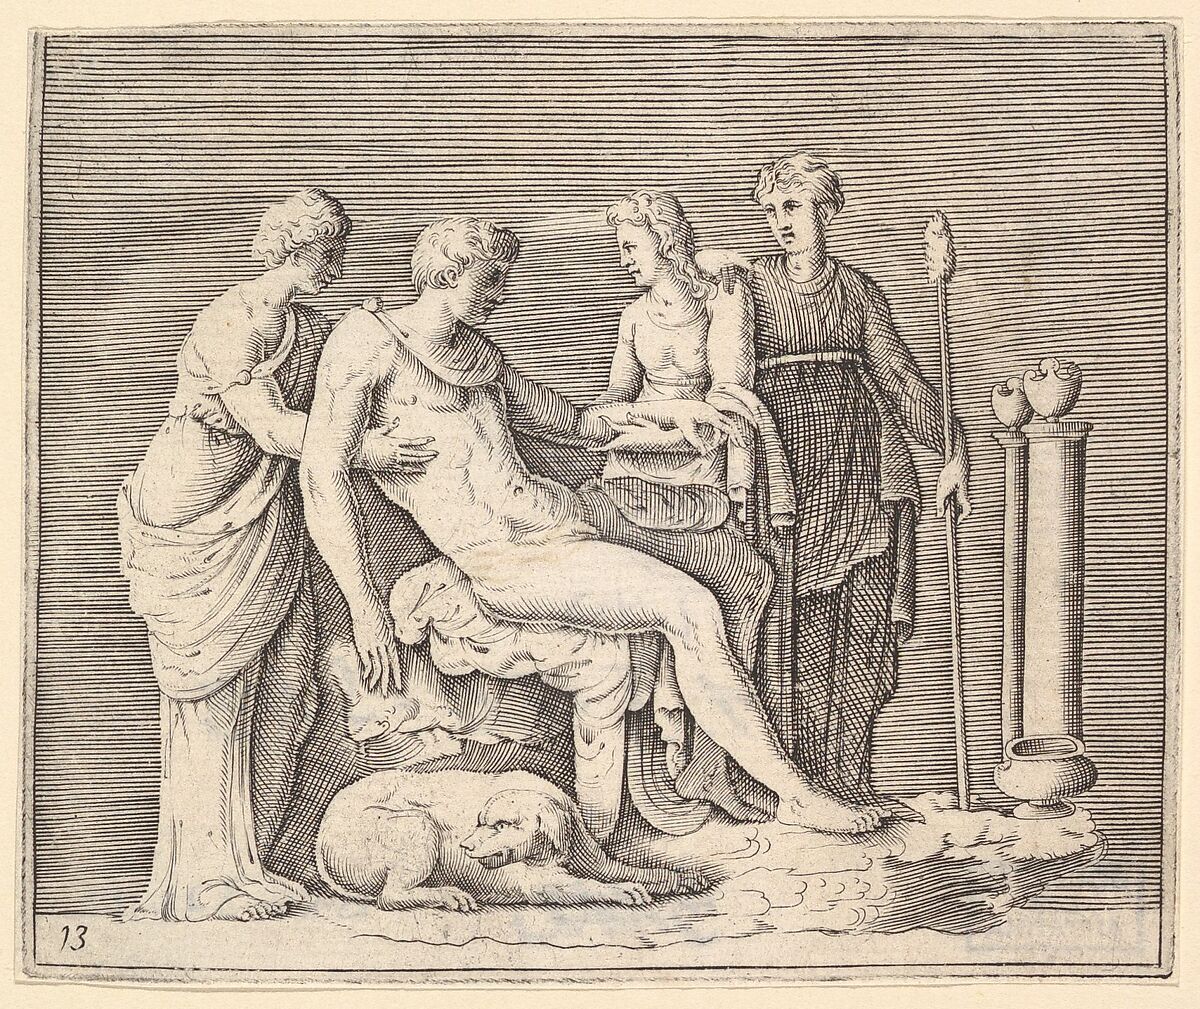 Man Attended by Three Women, from "Ex Antiquis Cameorum et Gemmae Delineata/ Liber Secundus/et ab Enea Vico Parmen Incis", Engraved by Anonymous, Italian, 16th century, Engraving; third state 